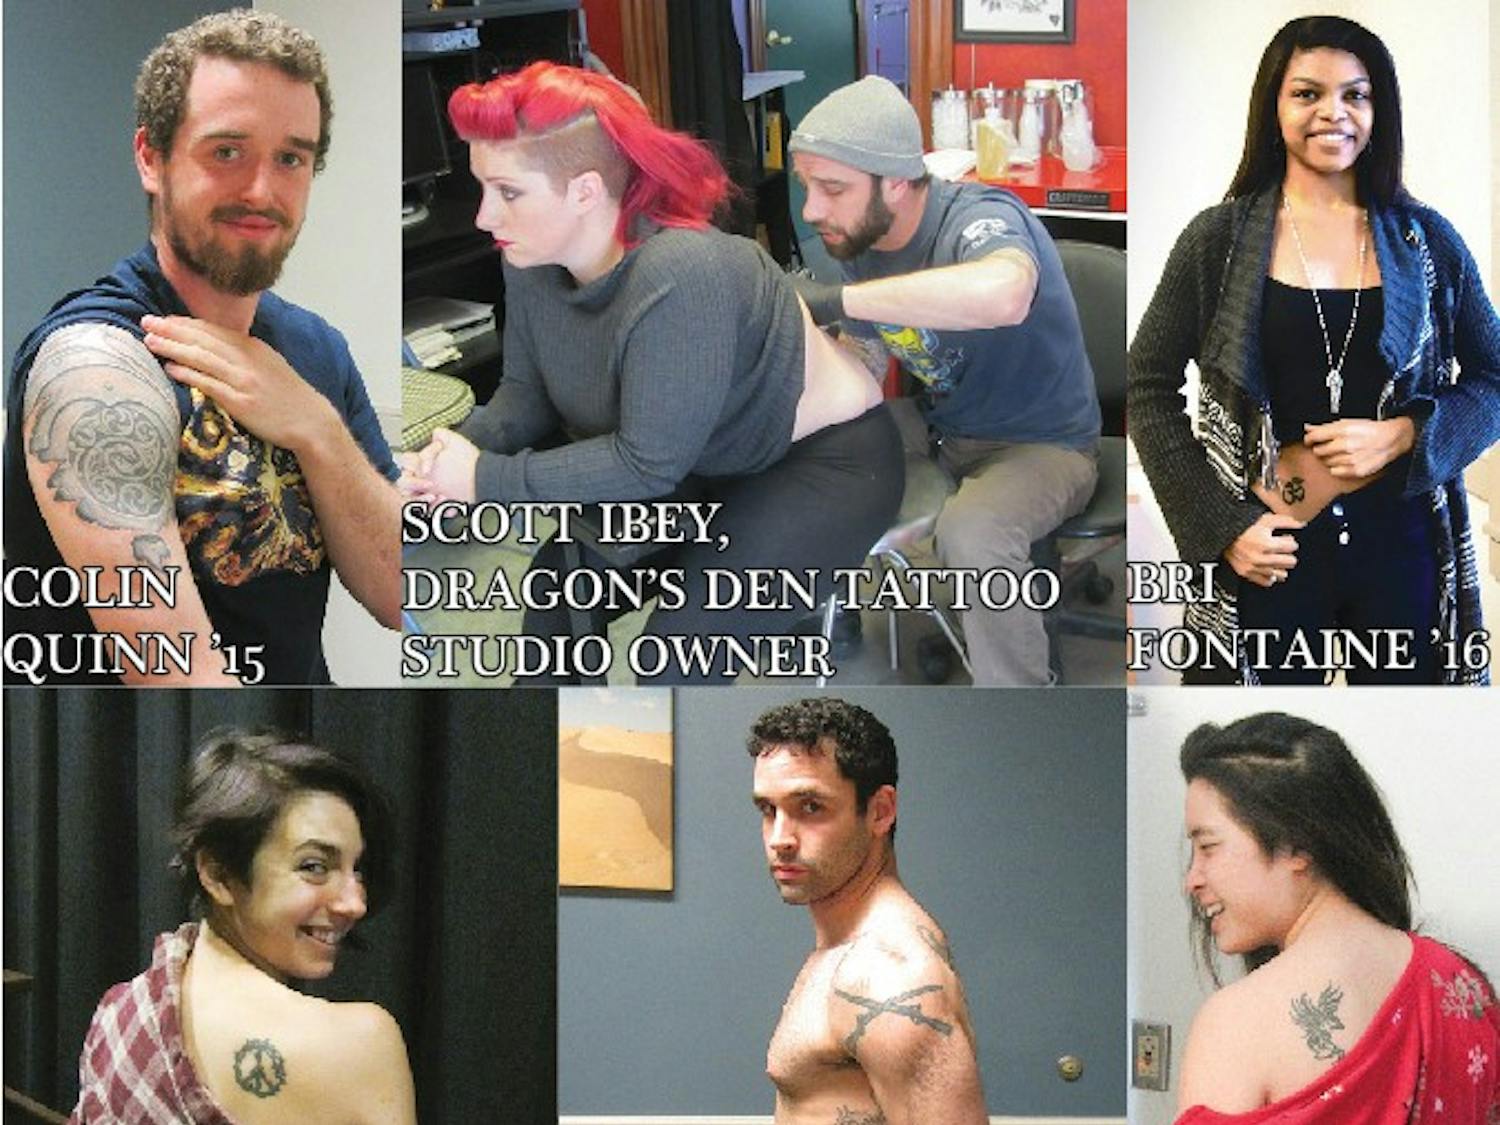 Dartmouth students, Dragon's Den Tattoo Studio owner Scott Ibey said, usually appear more nervous than his typical clientele. 